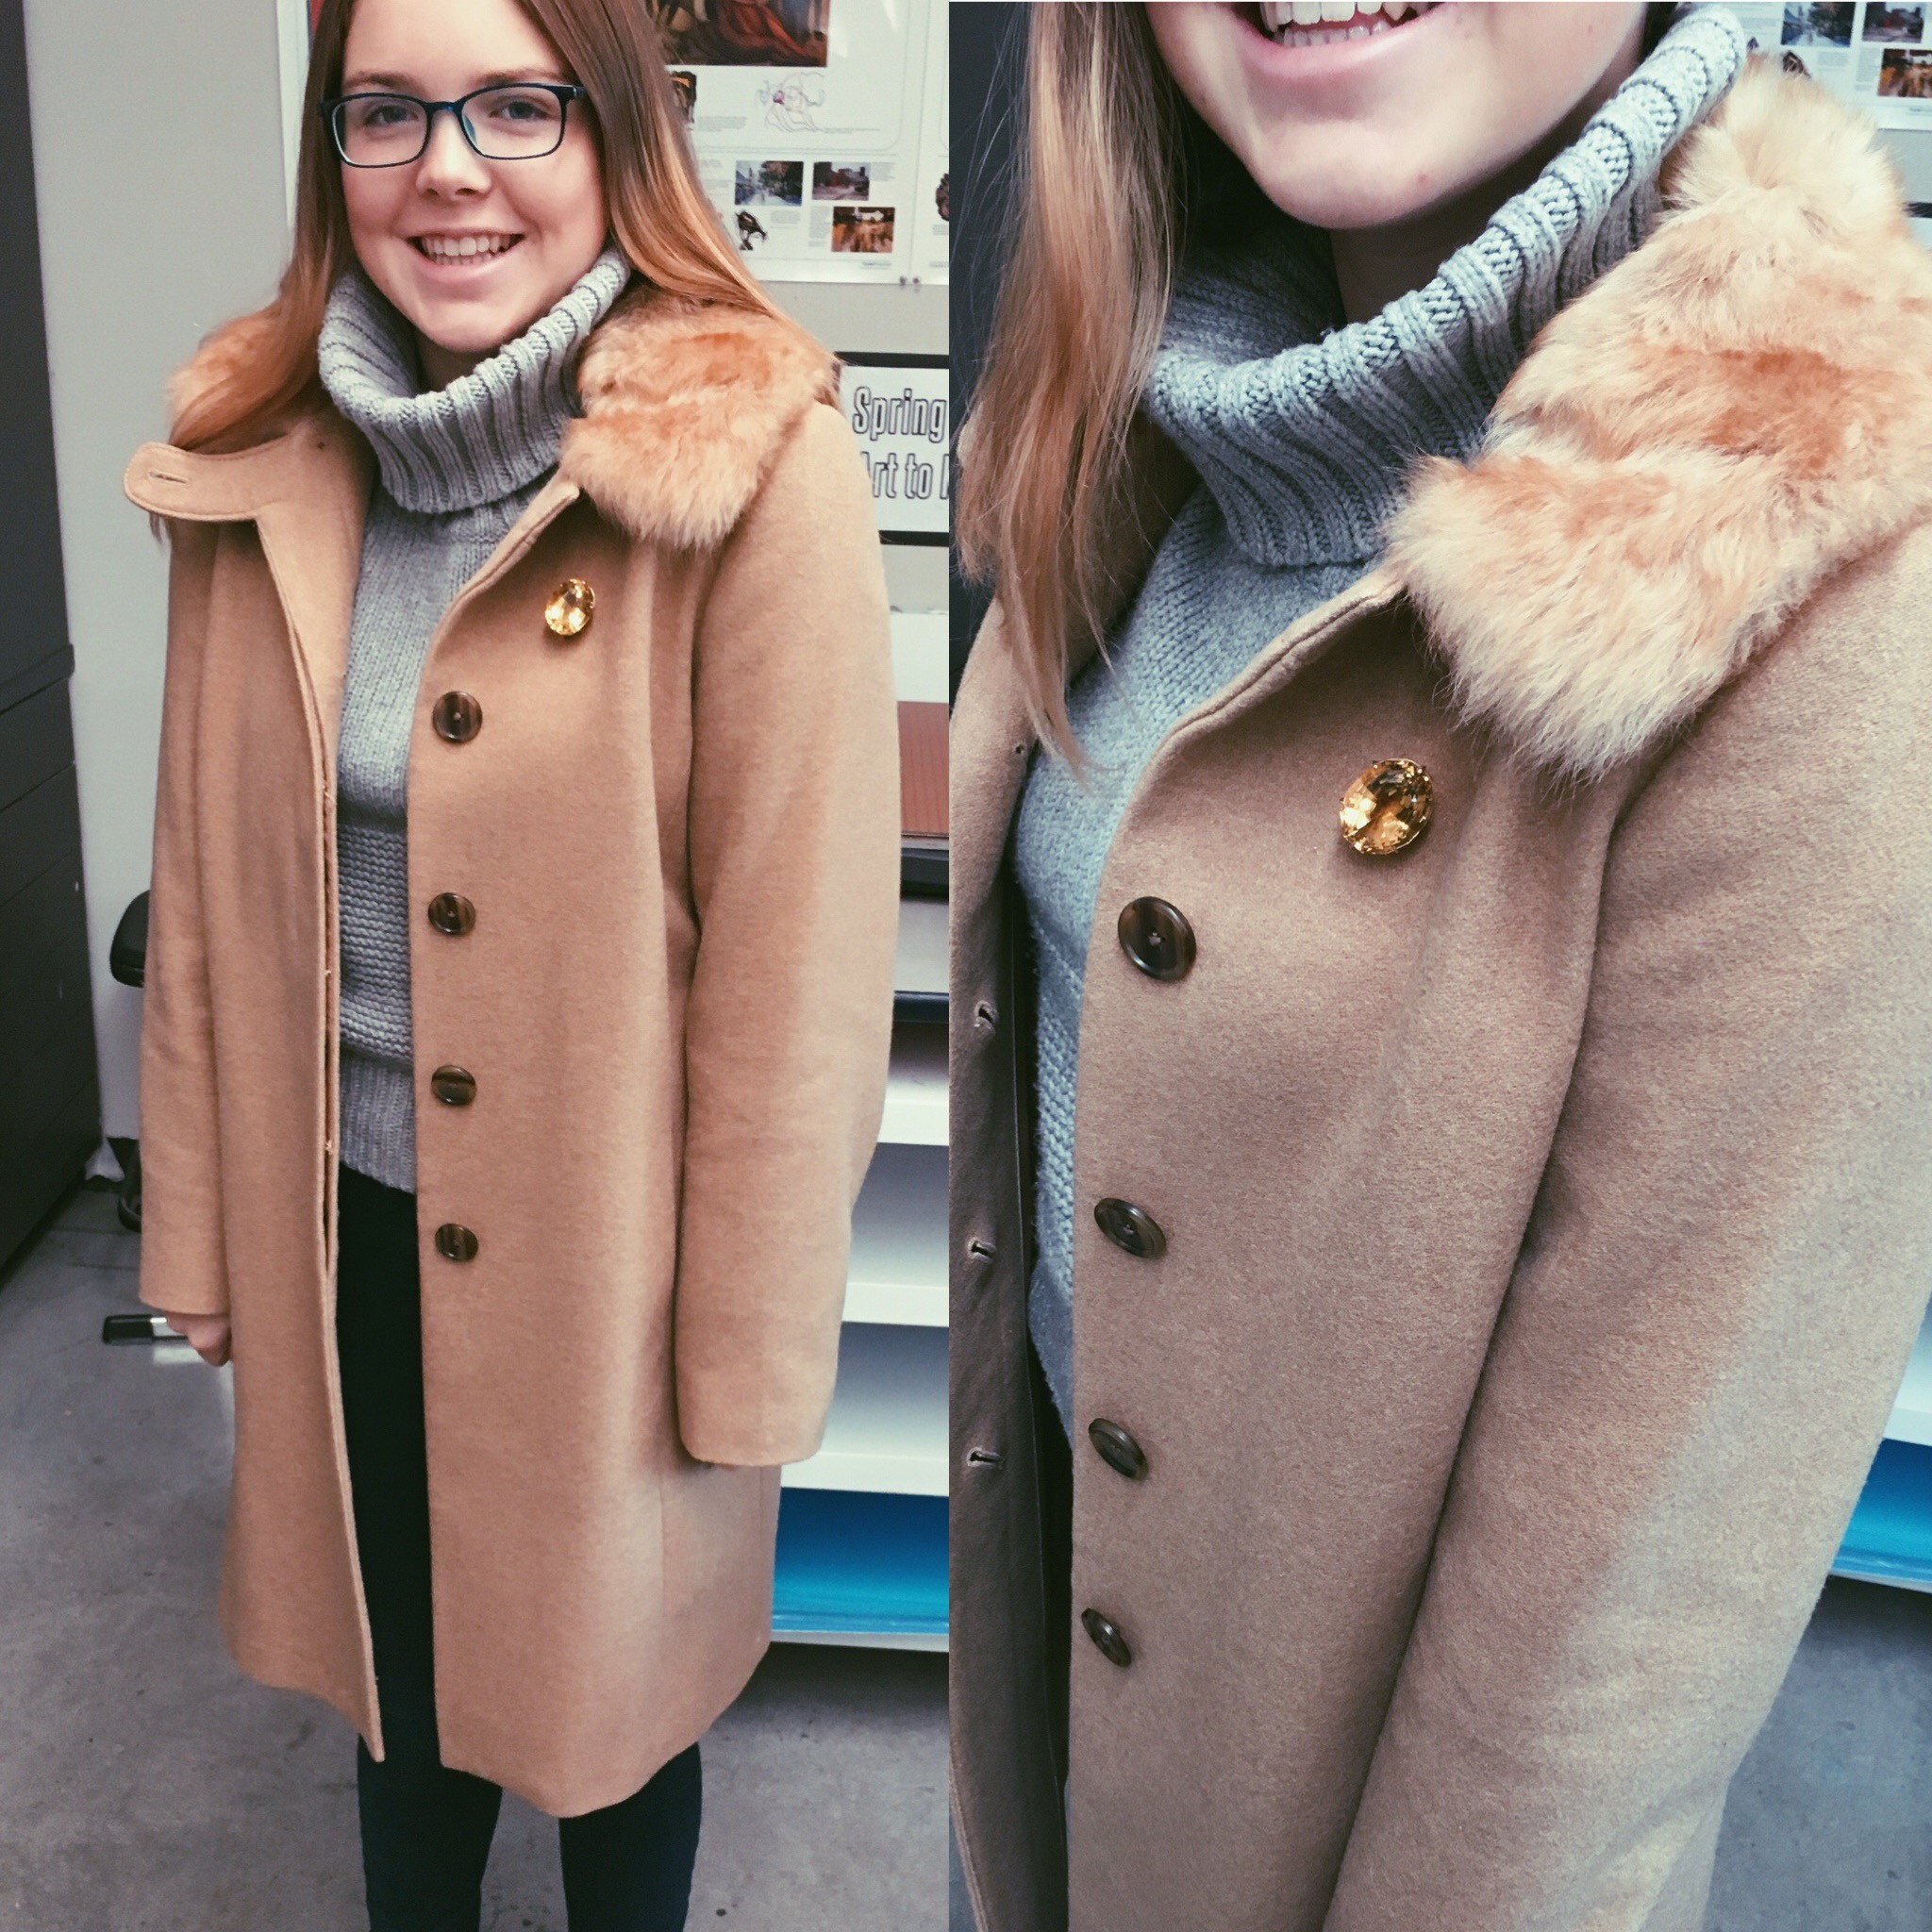   Ashley ‘17:  Ashley goes with a classic Banana Republic coat and Anthropologie turtleneck to brave the cold. 